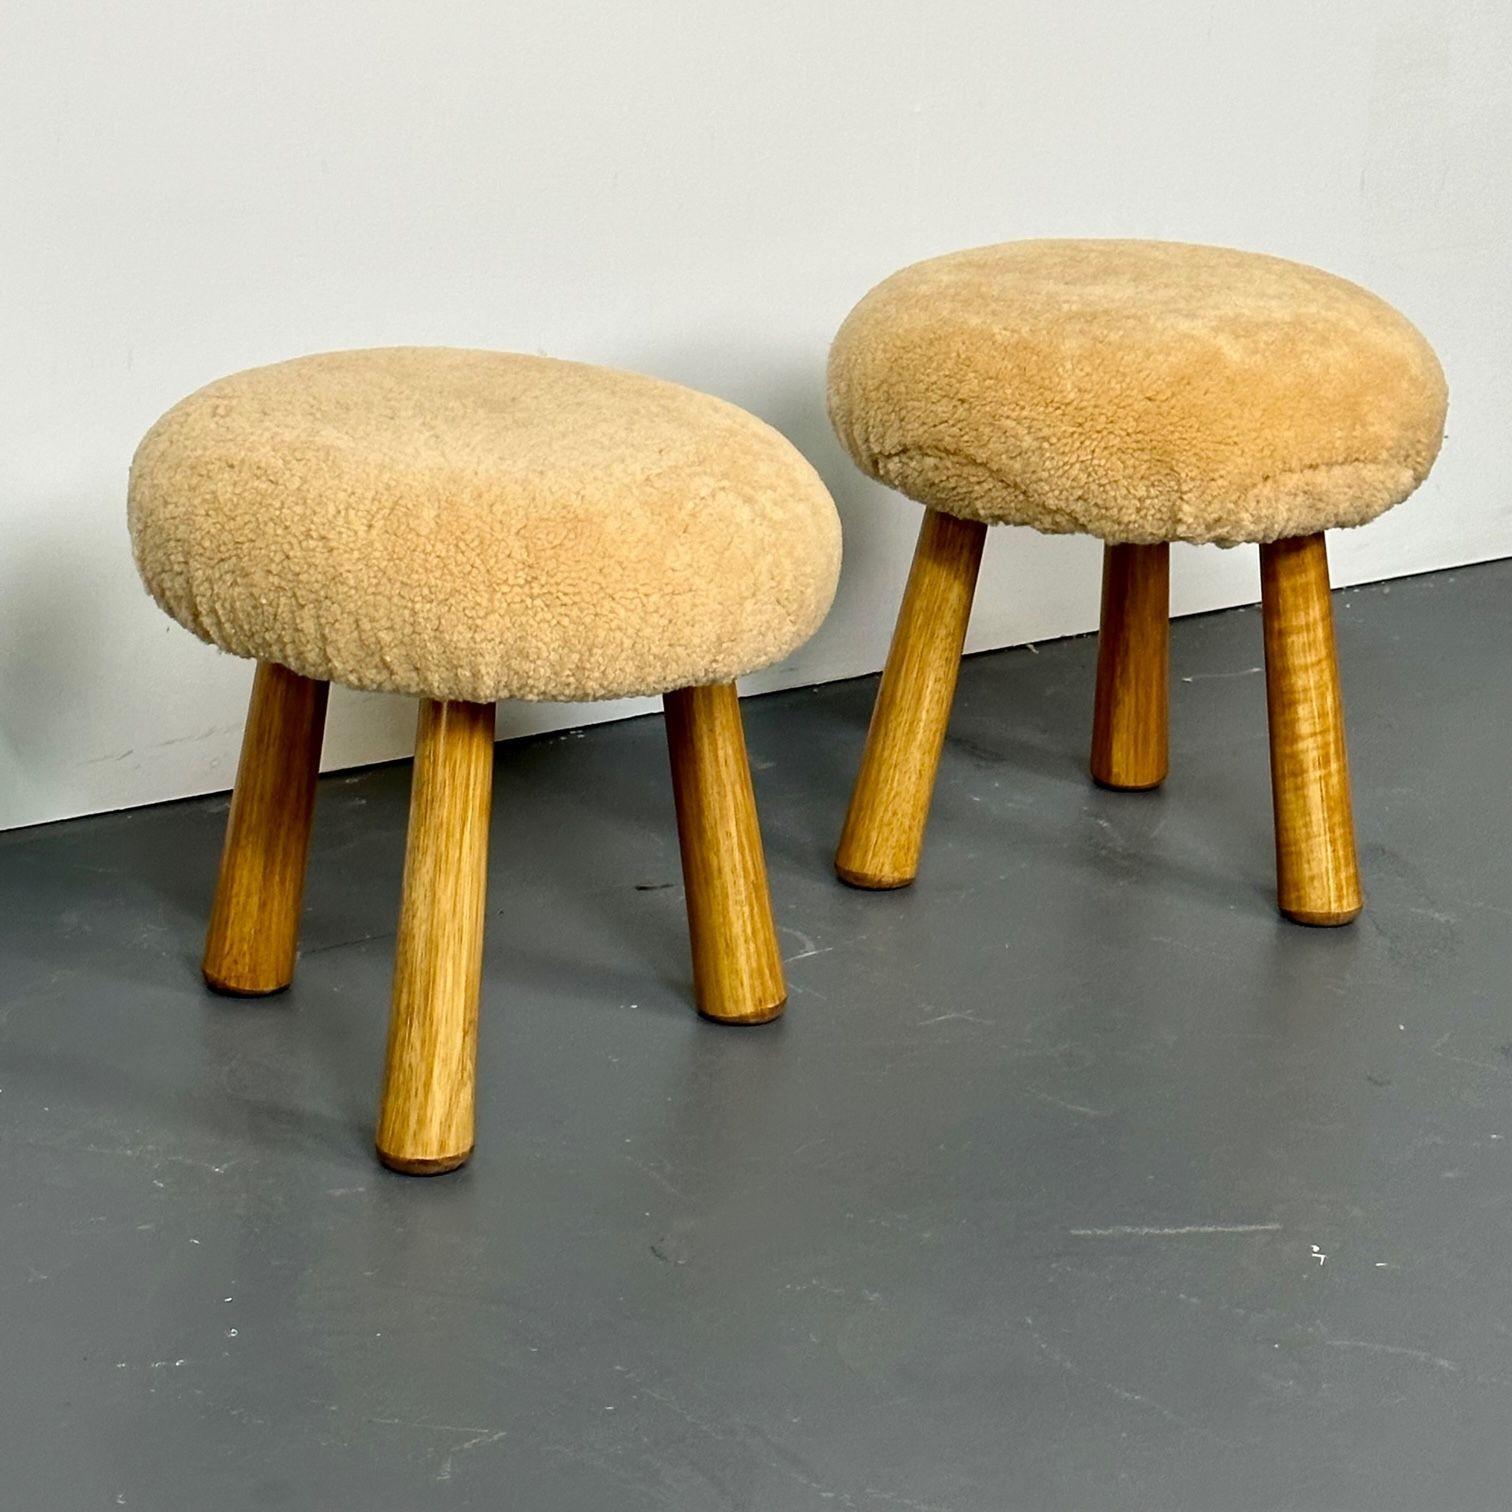 Pair of Contemporary Scandinavian Modern Style Sheepskin Stools / Ottomans
Contemporary organic form tri-pod stools or ottomans. New memory foam cushioning and genuine shearling. Can mix and match beige or honey sheepskin color stools. The beige